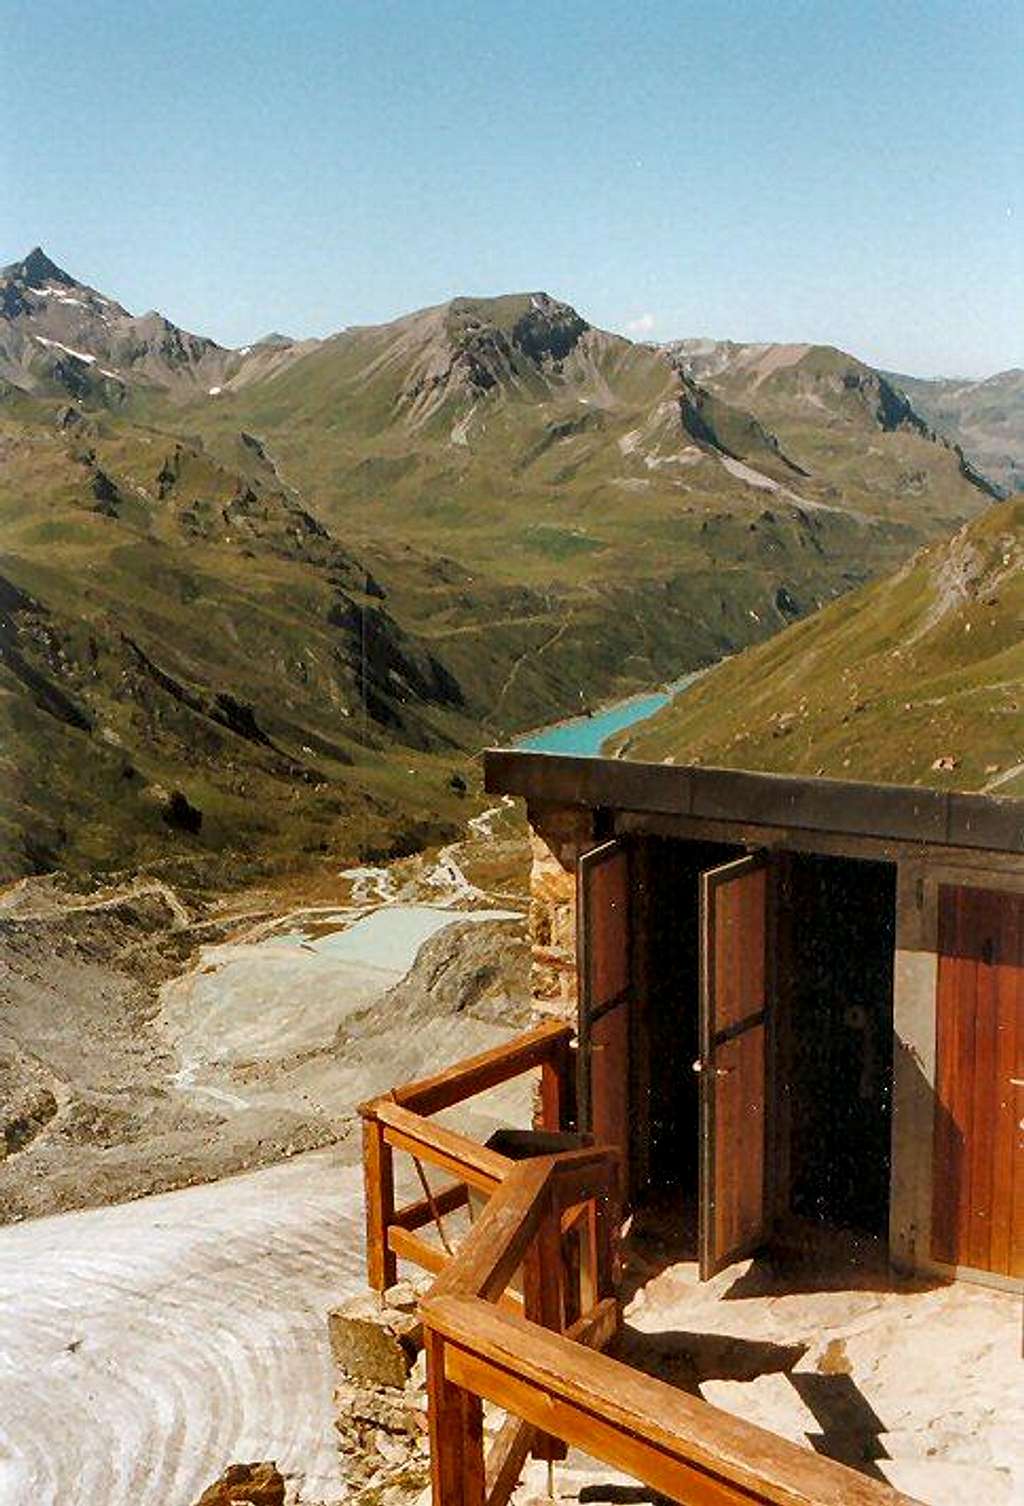 The Moiry Hut offers room for three